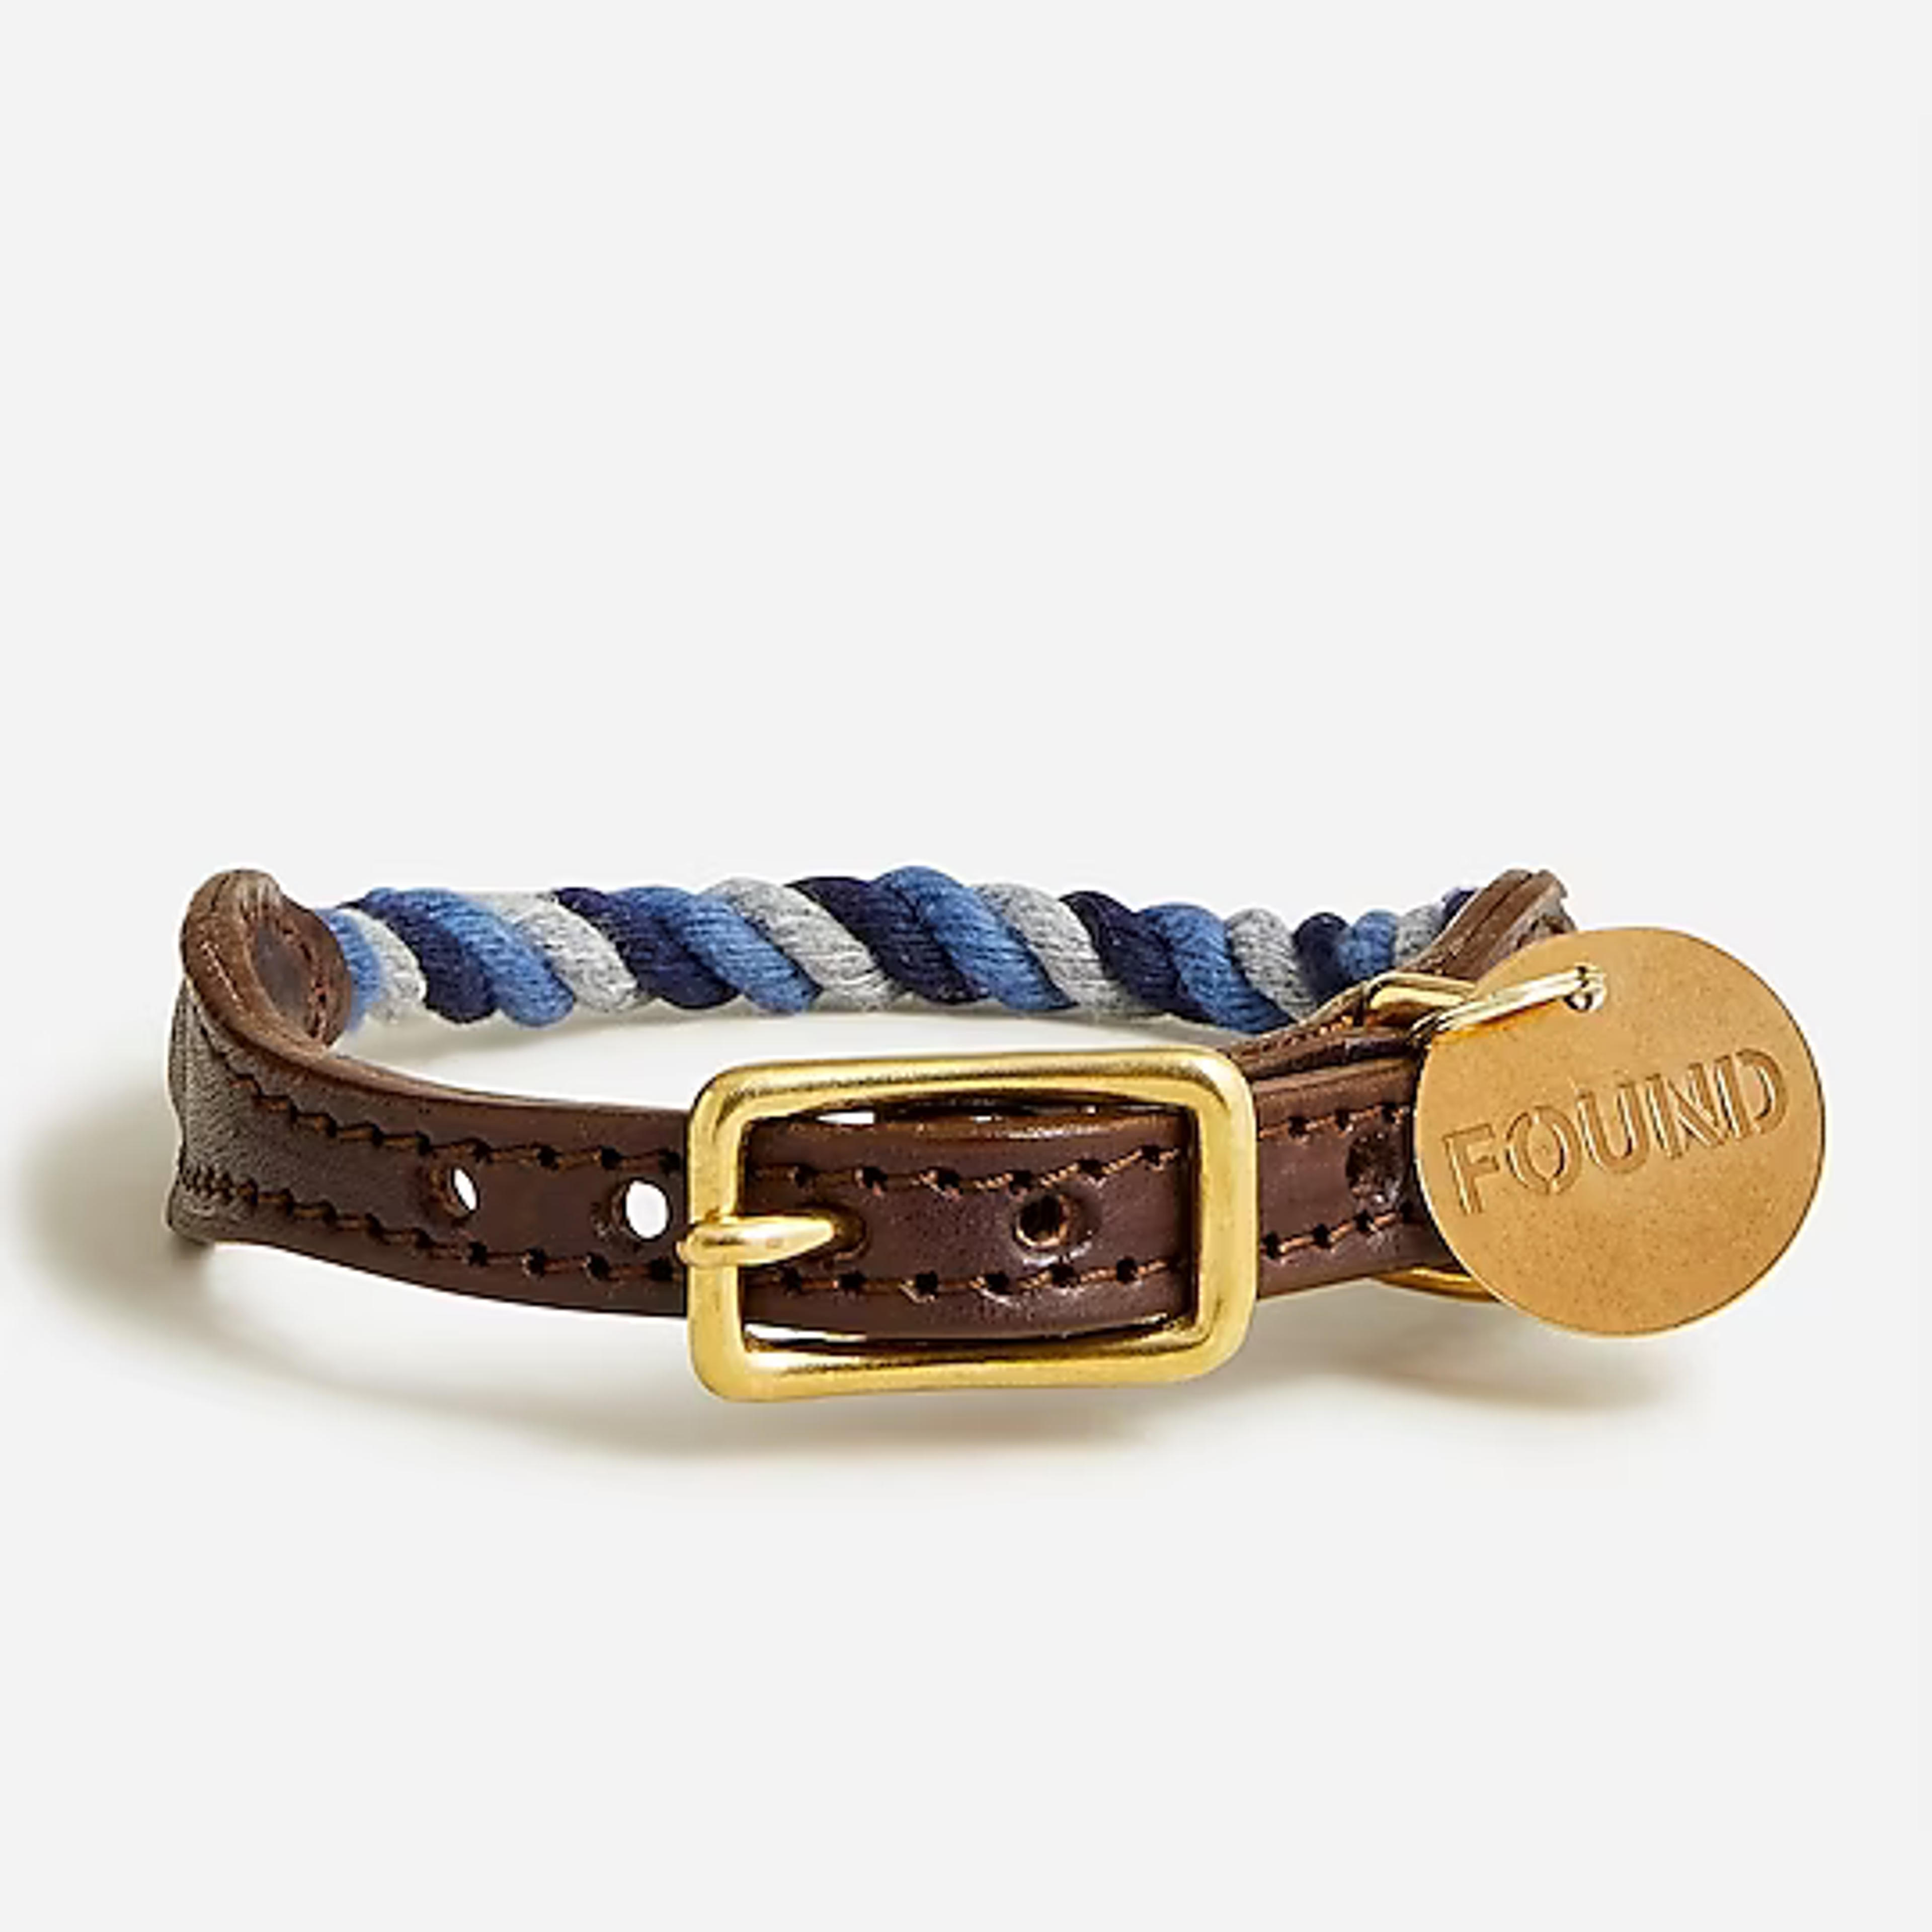 J.Crew: Found My Animal™ X J.Crew Nantucket Upcycled-rope Cat And Dog Collar For Men